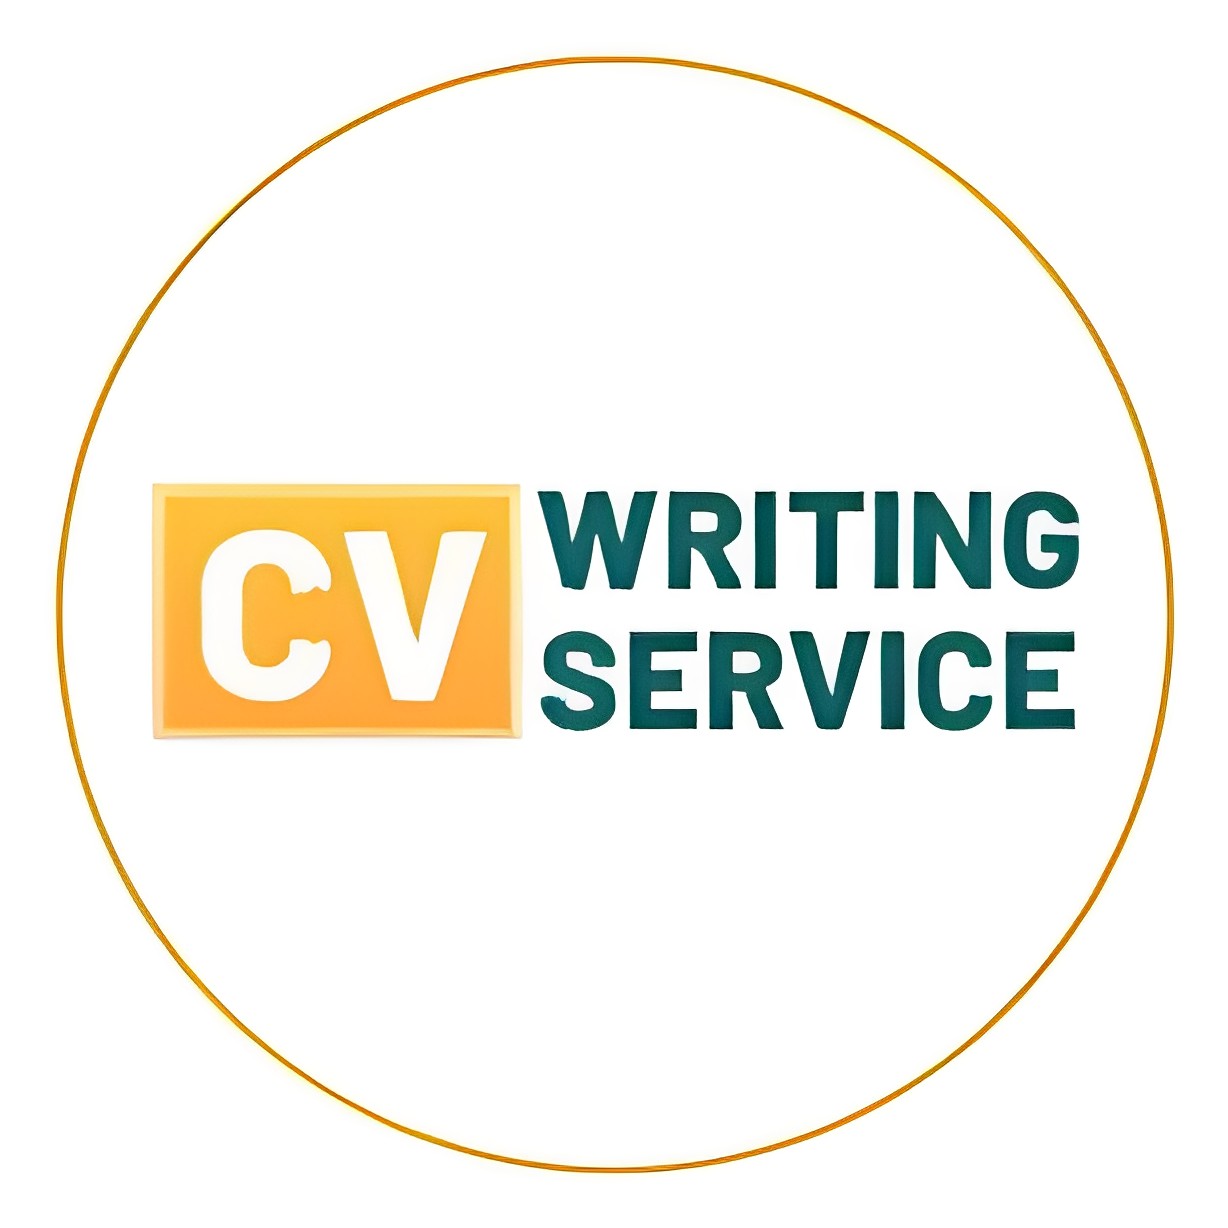 cv writing service | writers in london